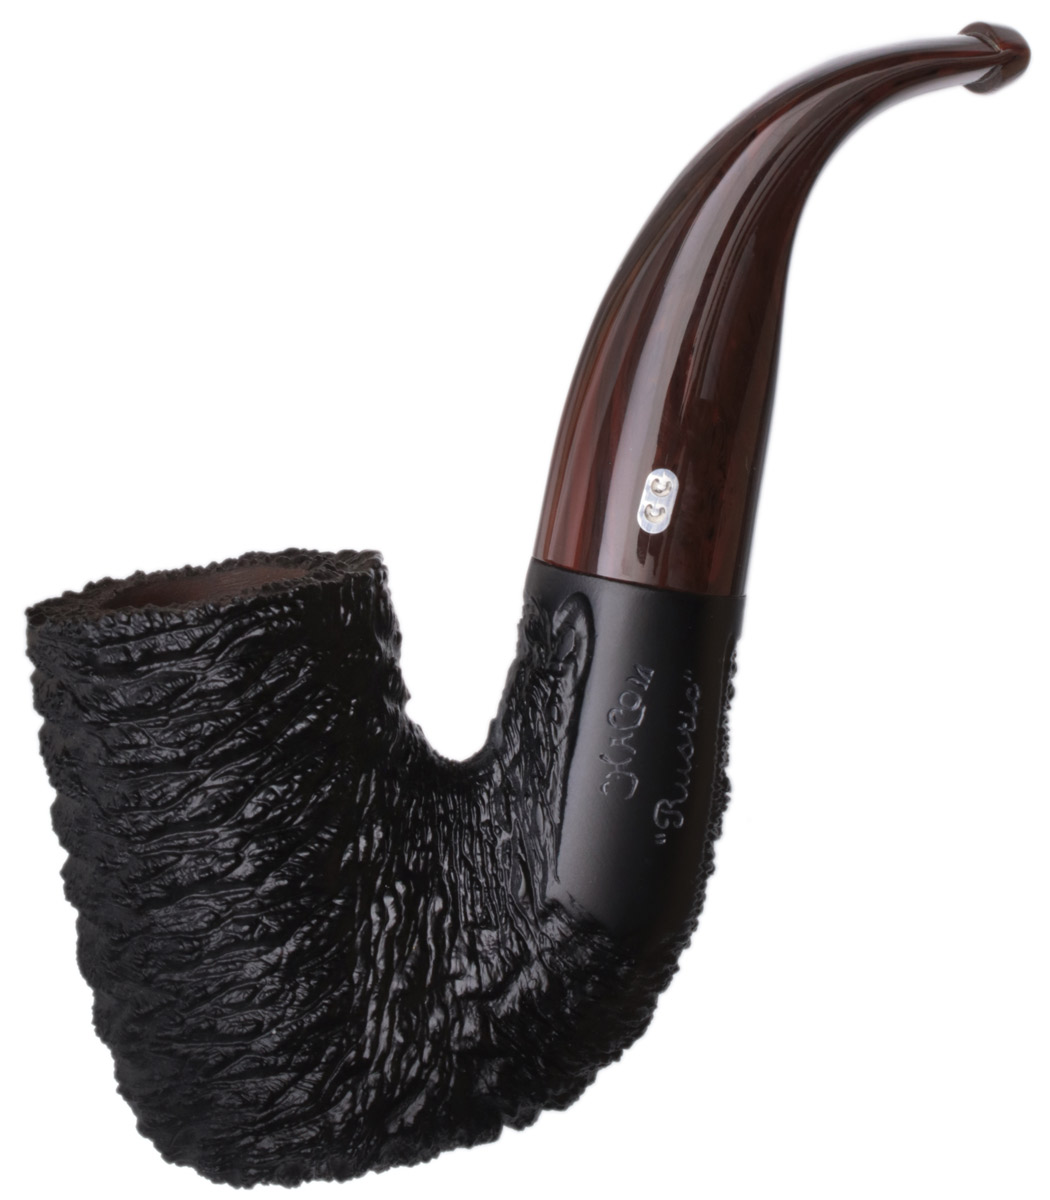 French Estate Chacom Rusticated (235) (9mm) (Unsmoked)